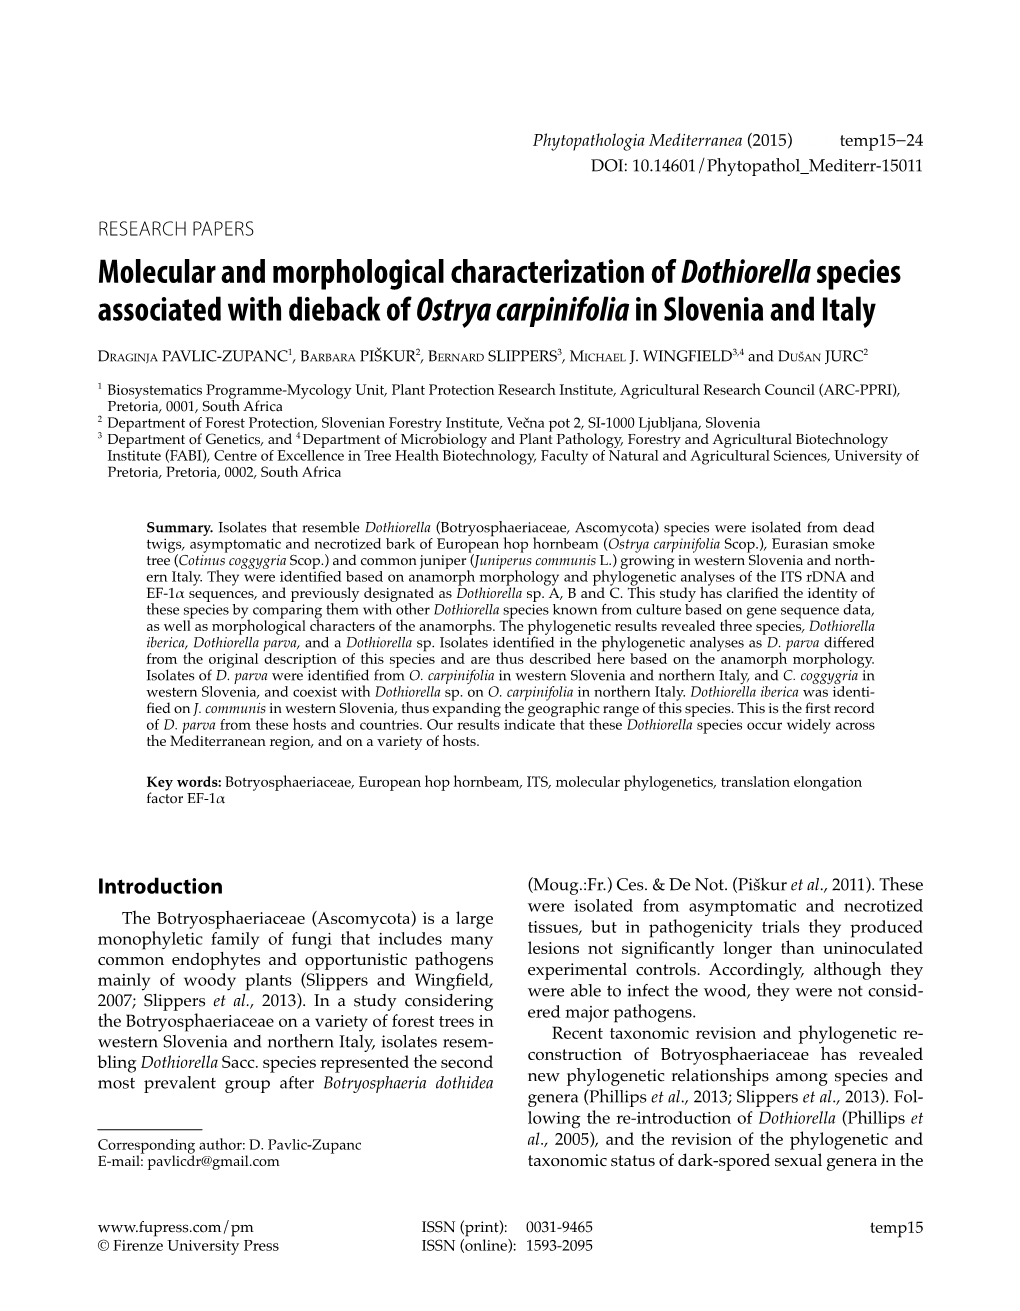 Molecular and Morphological Characterization of Dothiorella Species Associated with Dieback of Ostrya Carpinifolia in Slovenia and Italy